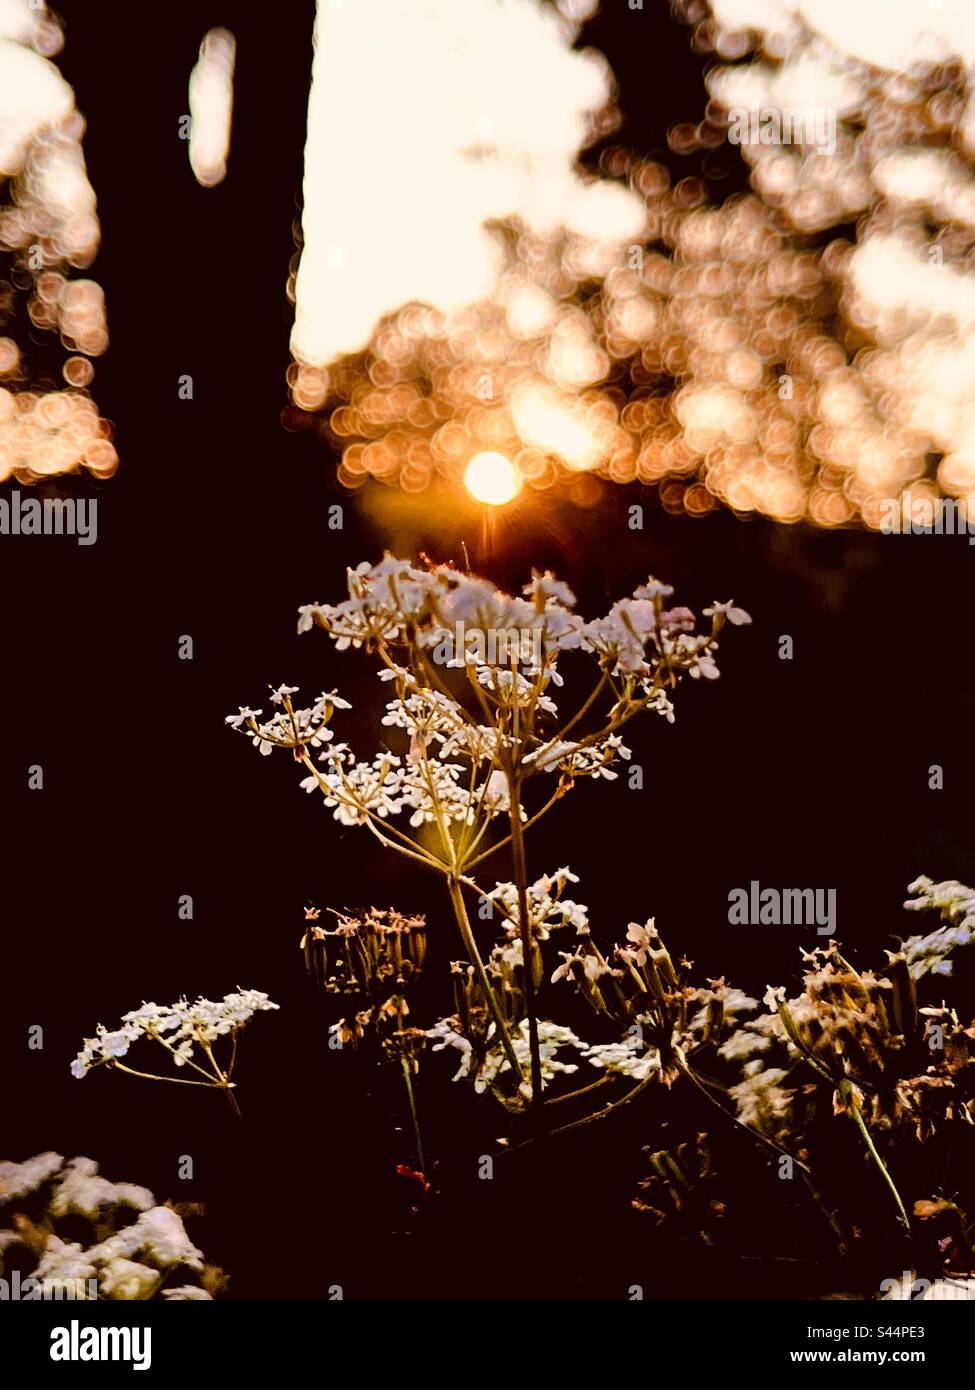 Evening sunset catches wild flowering plant in golden light Stock Photo